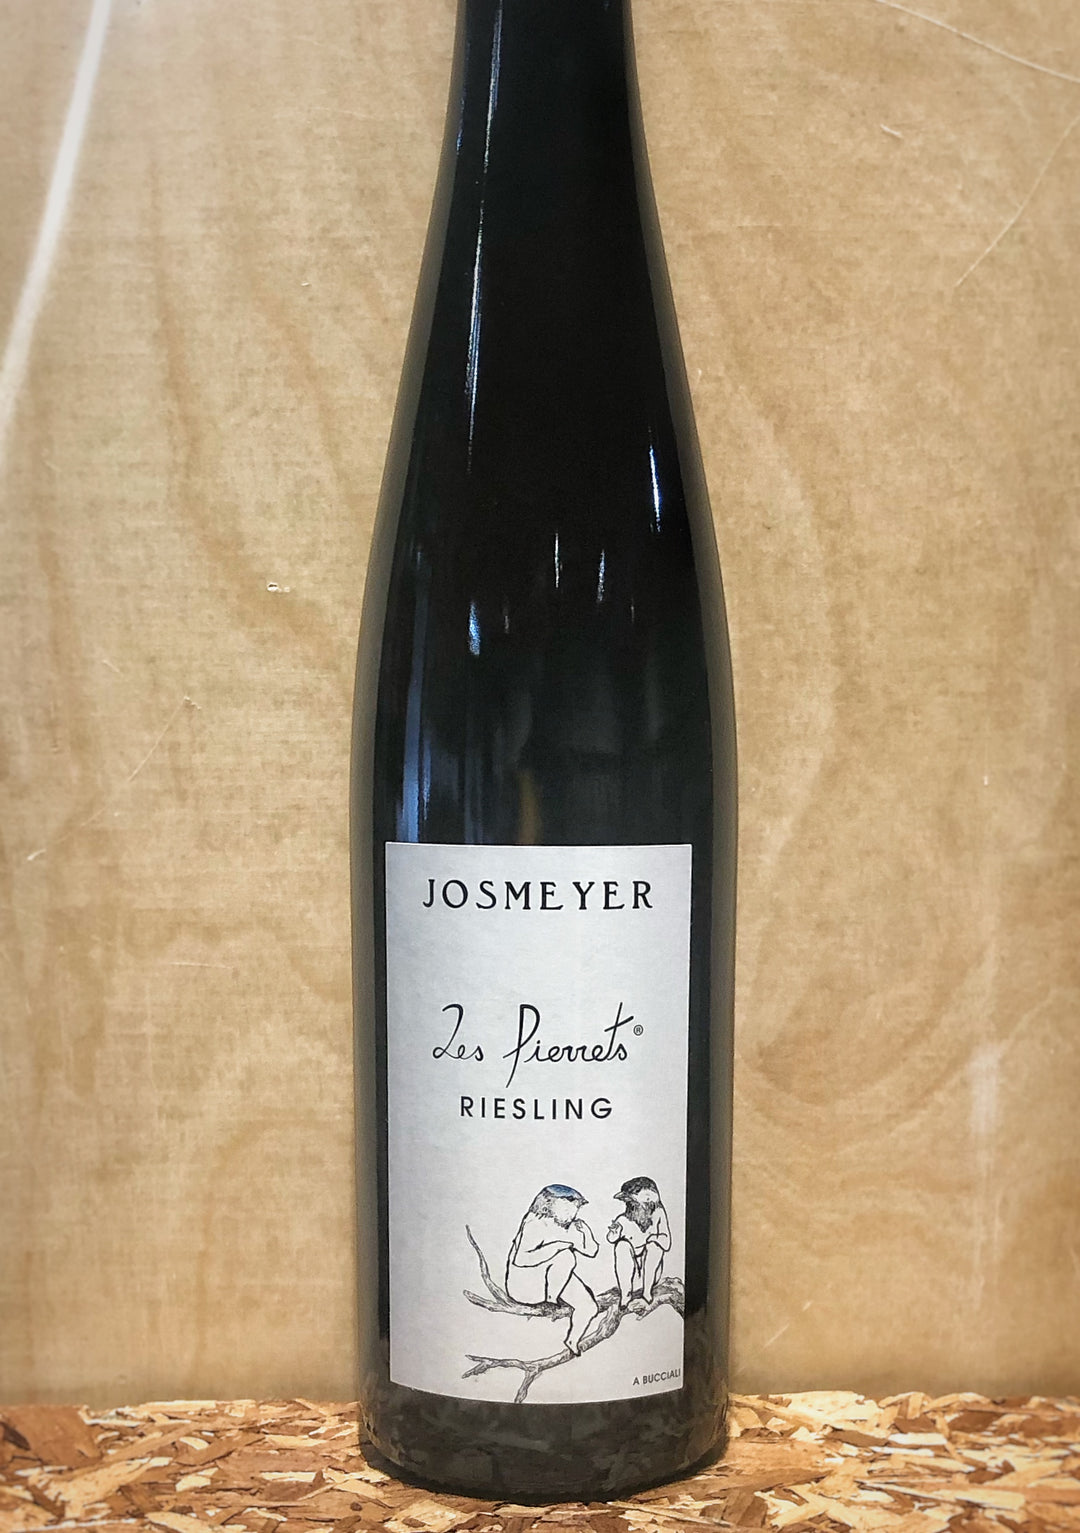 Josmeyer 'Les Pierrets' Riesling 2019 (Alsace, France)